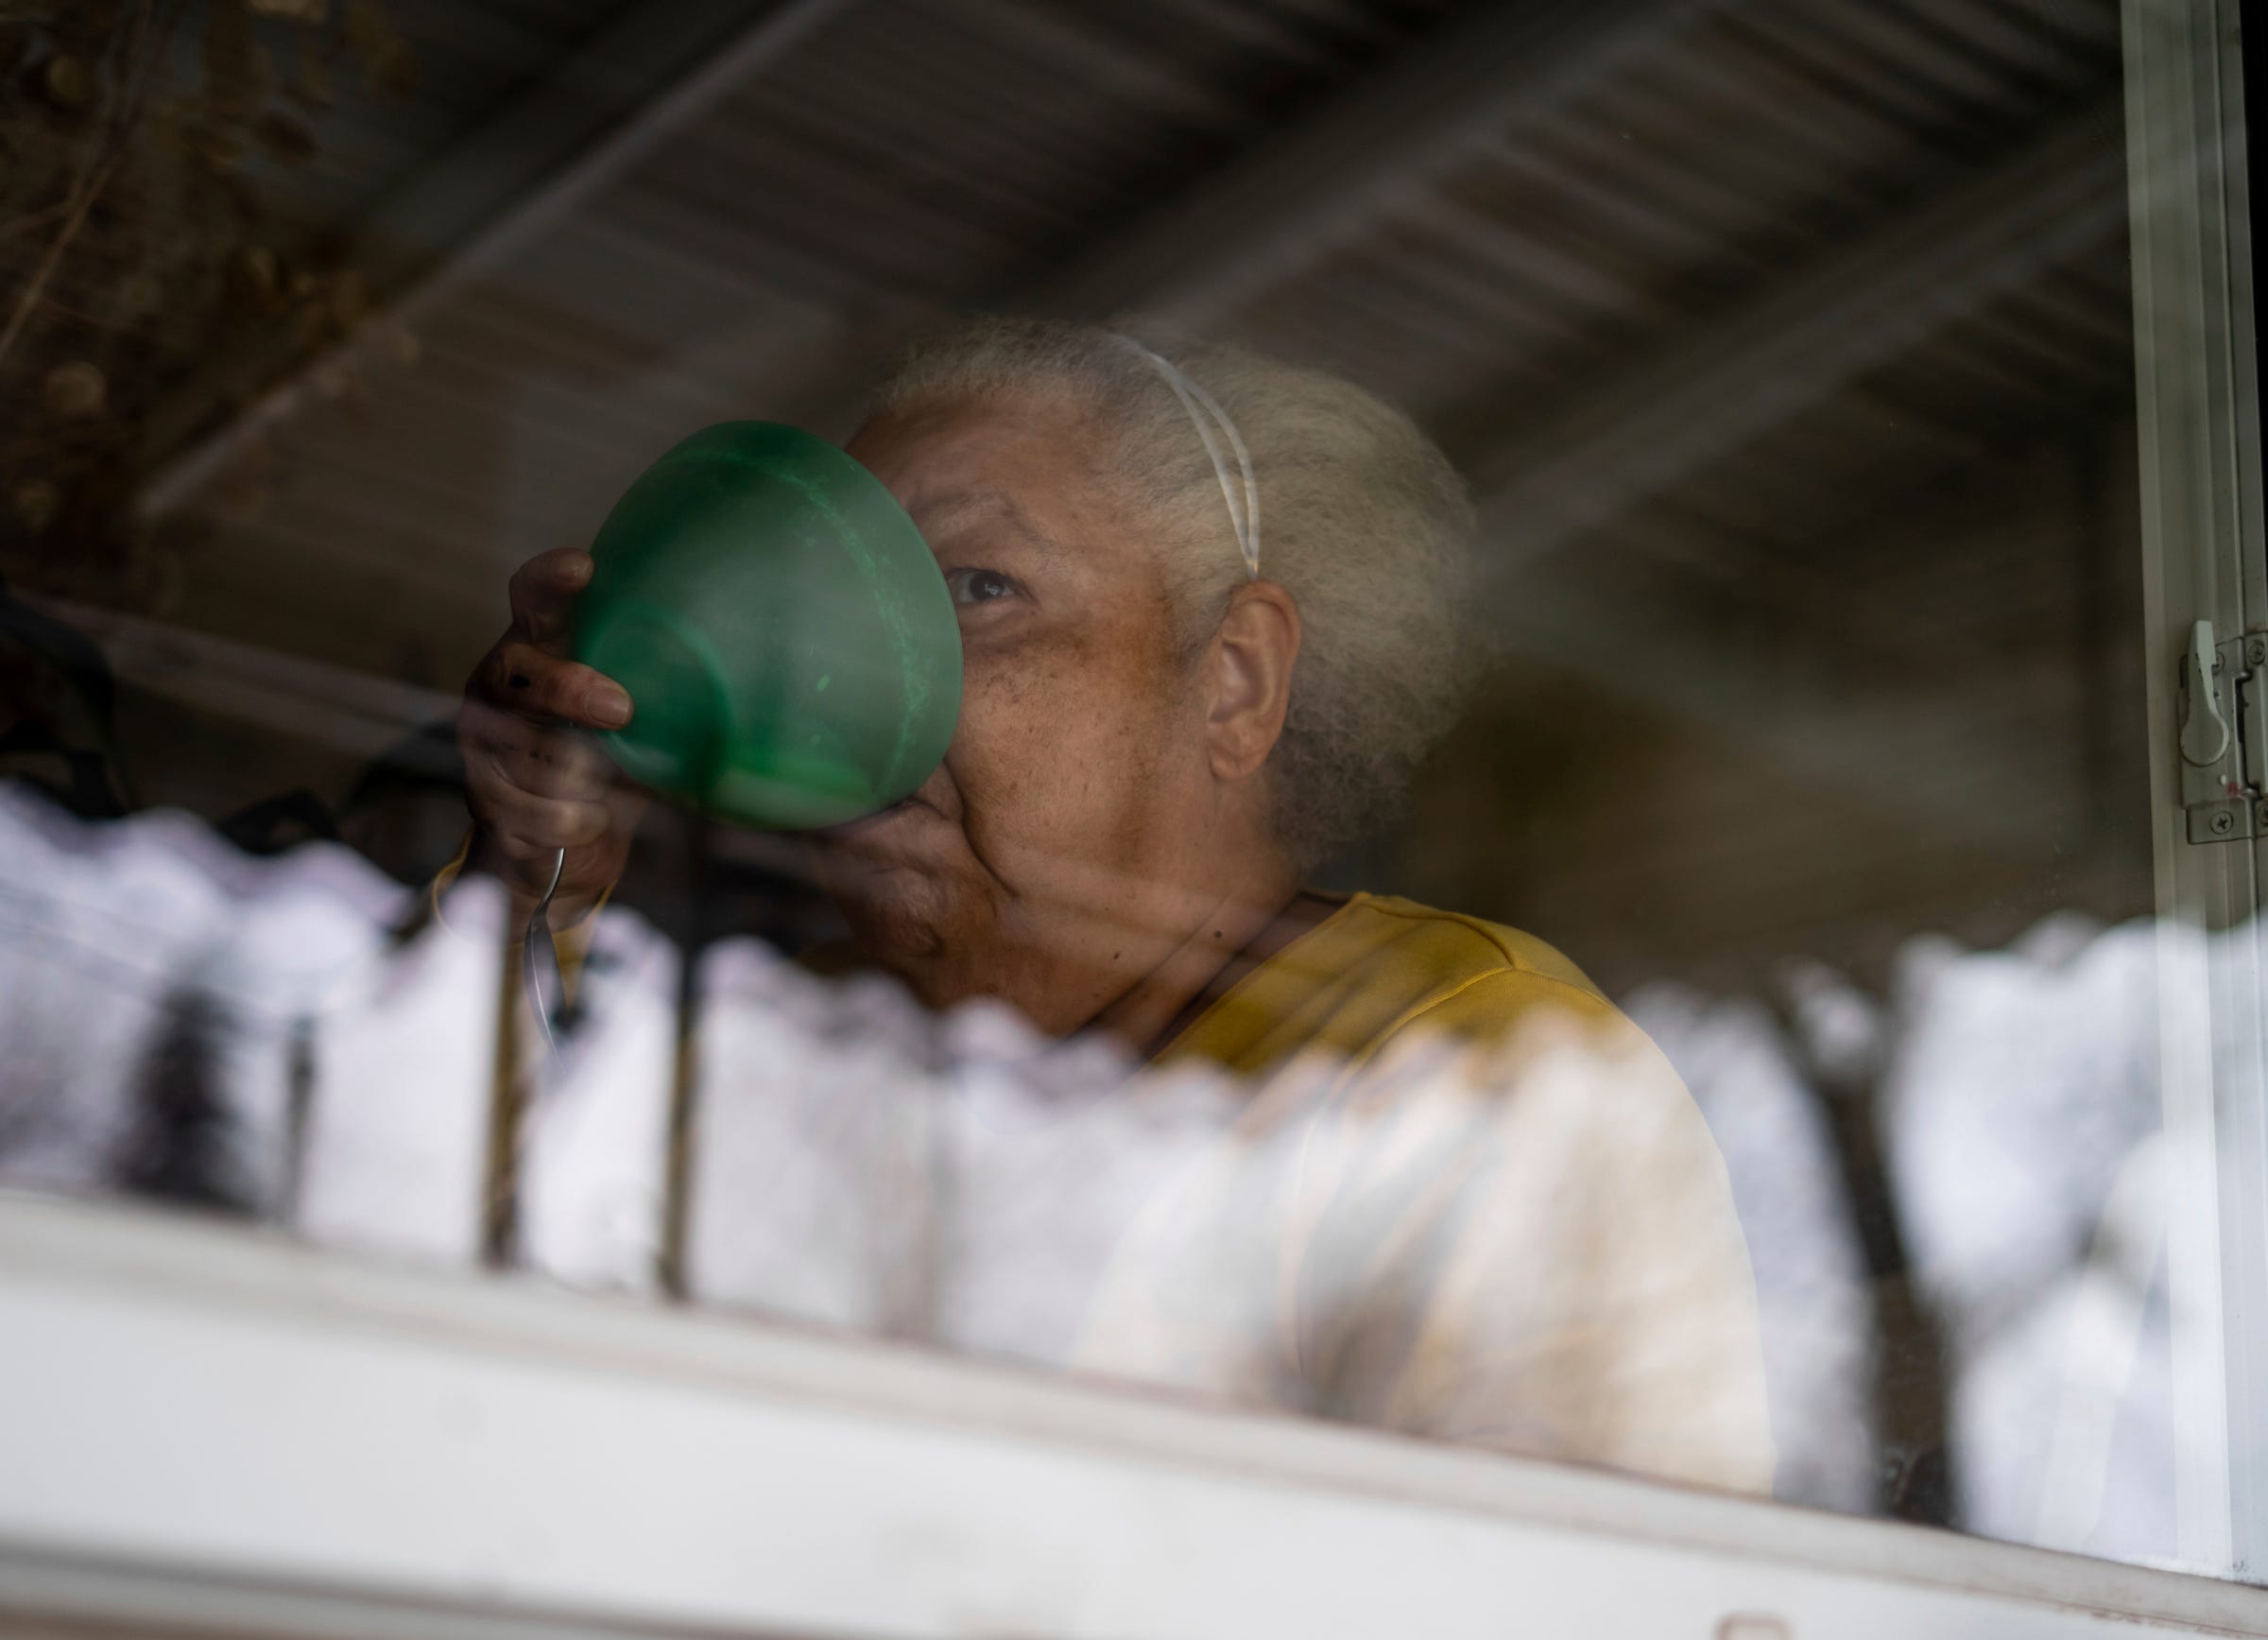 Debra Westbrook drinks the milk from her cereal bowl while staring out the front window in her dining room during a brief break from taking care of her son at her Detroit home in Detroit on Thursday, Feb. 10, 2022. "Marvin will be calling me soon, so I've got to eat up. I haven't changed him yet," said Westbrook. 